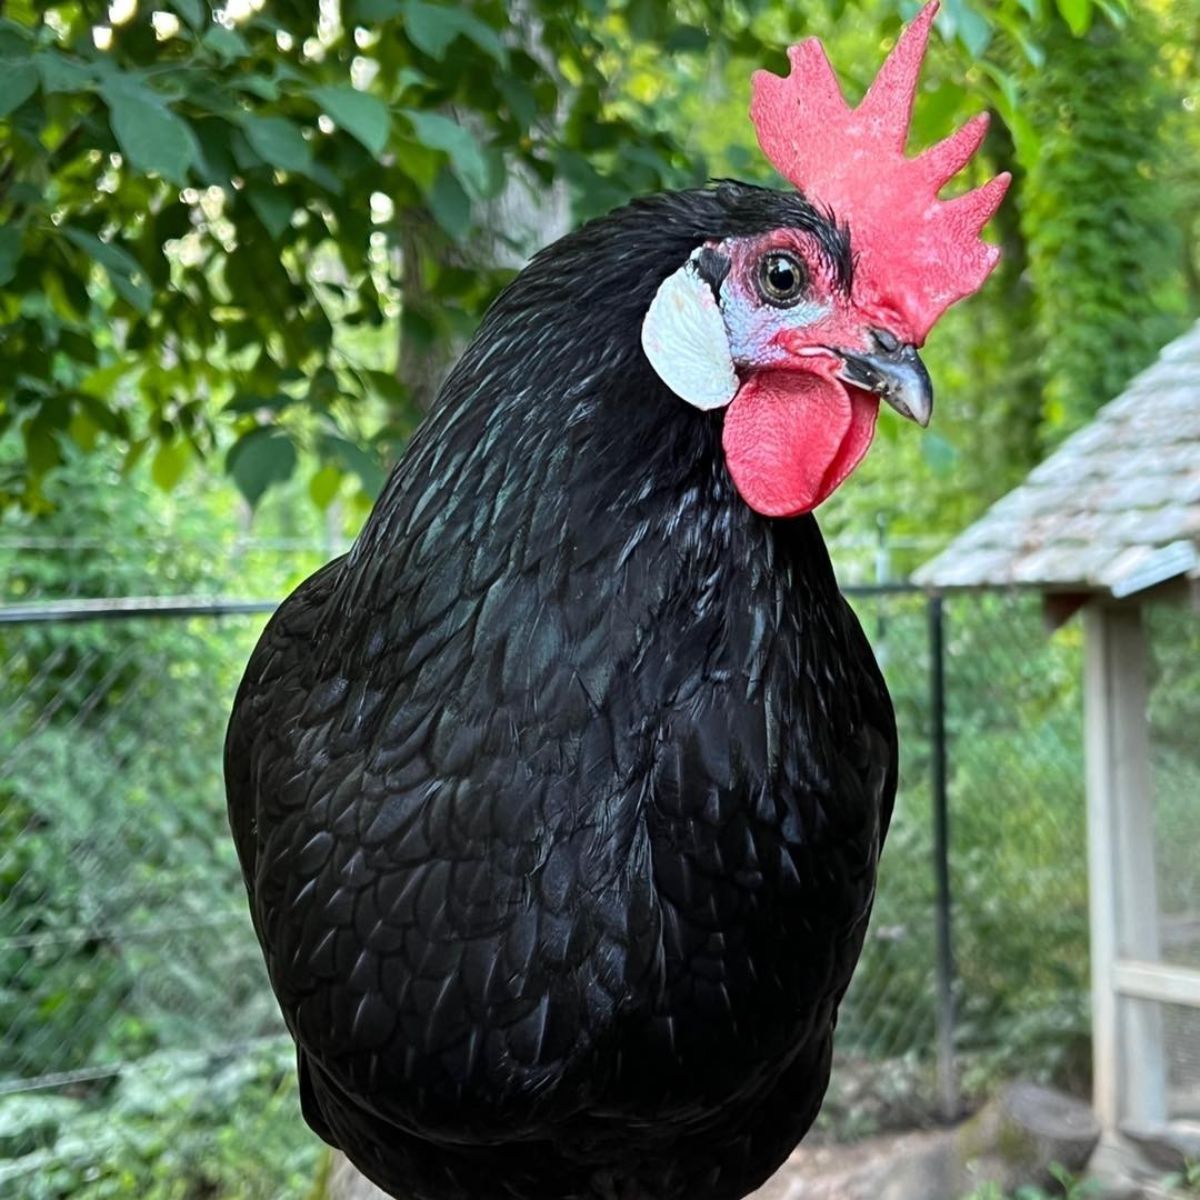 An adorable White Faced Black Spanish Chicken looking into a camera.